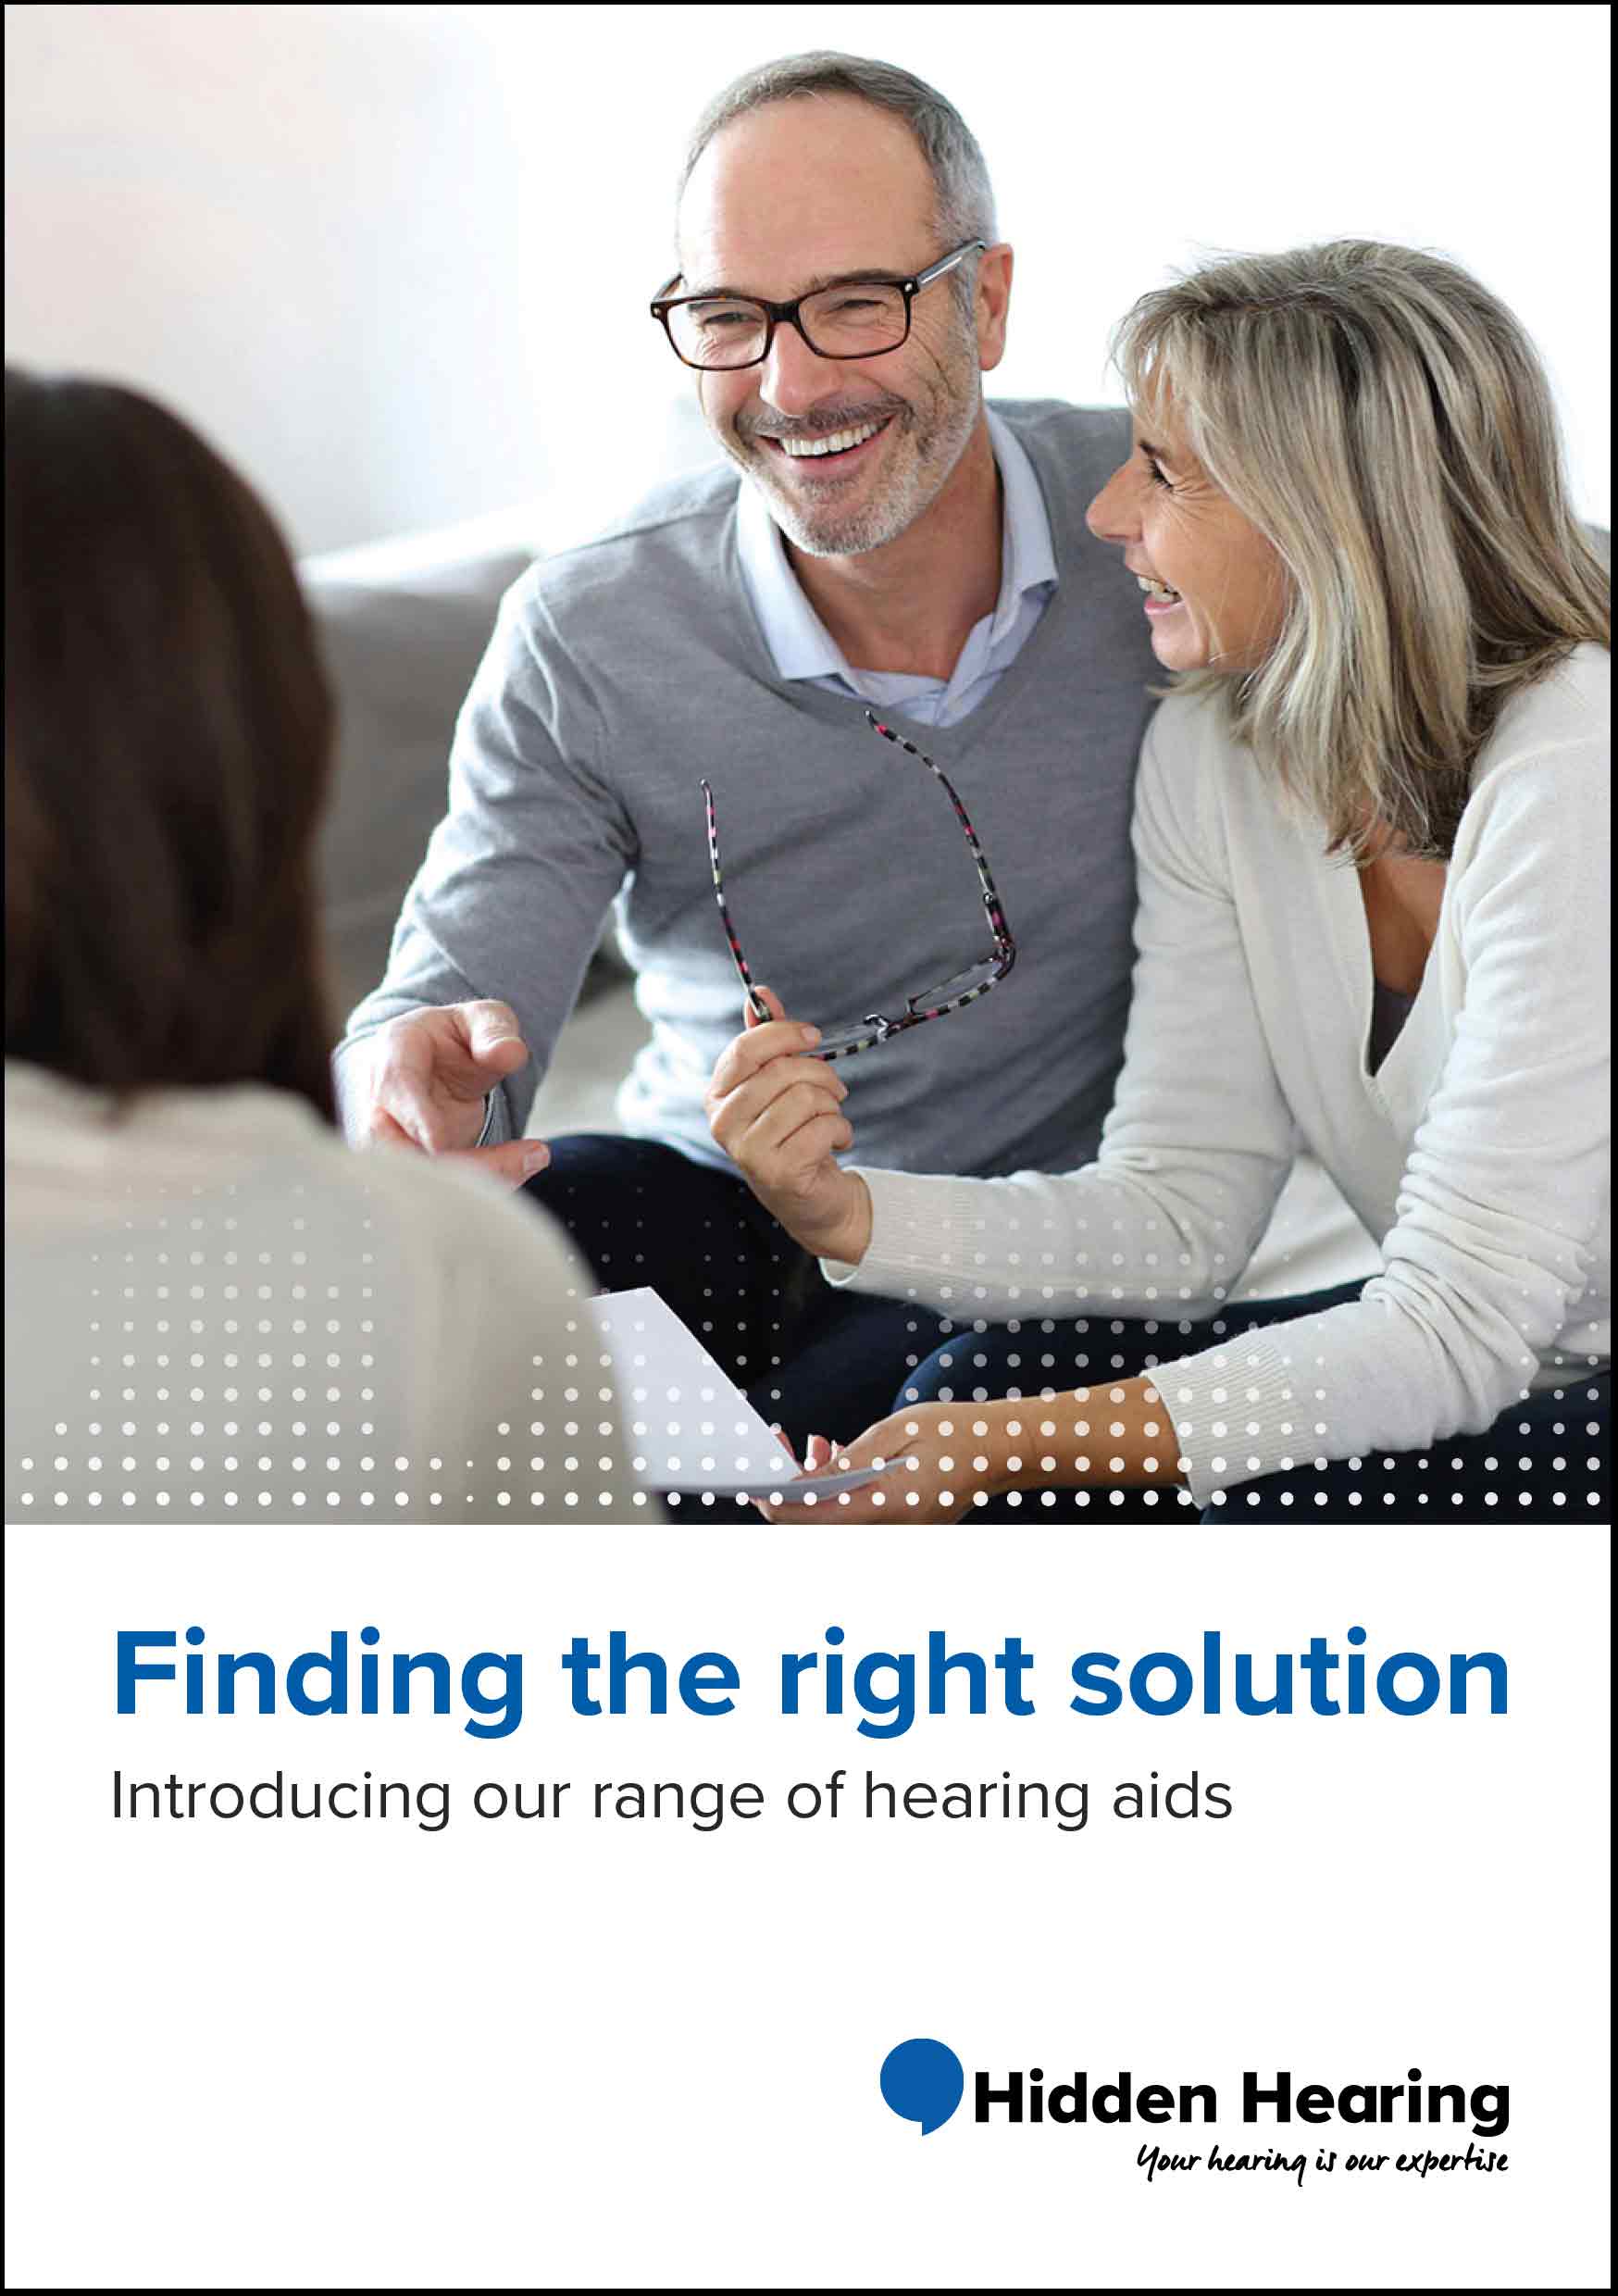 Finding the right solution brochure cover